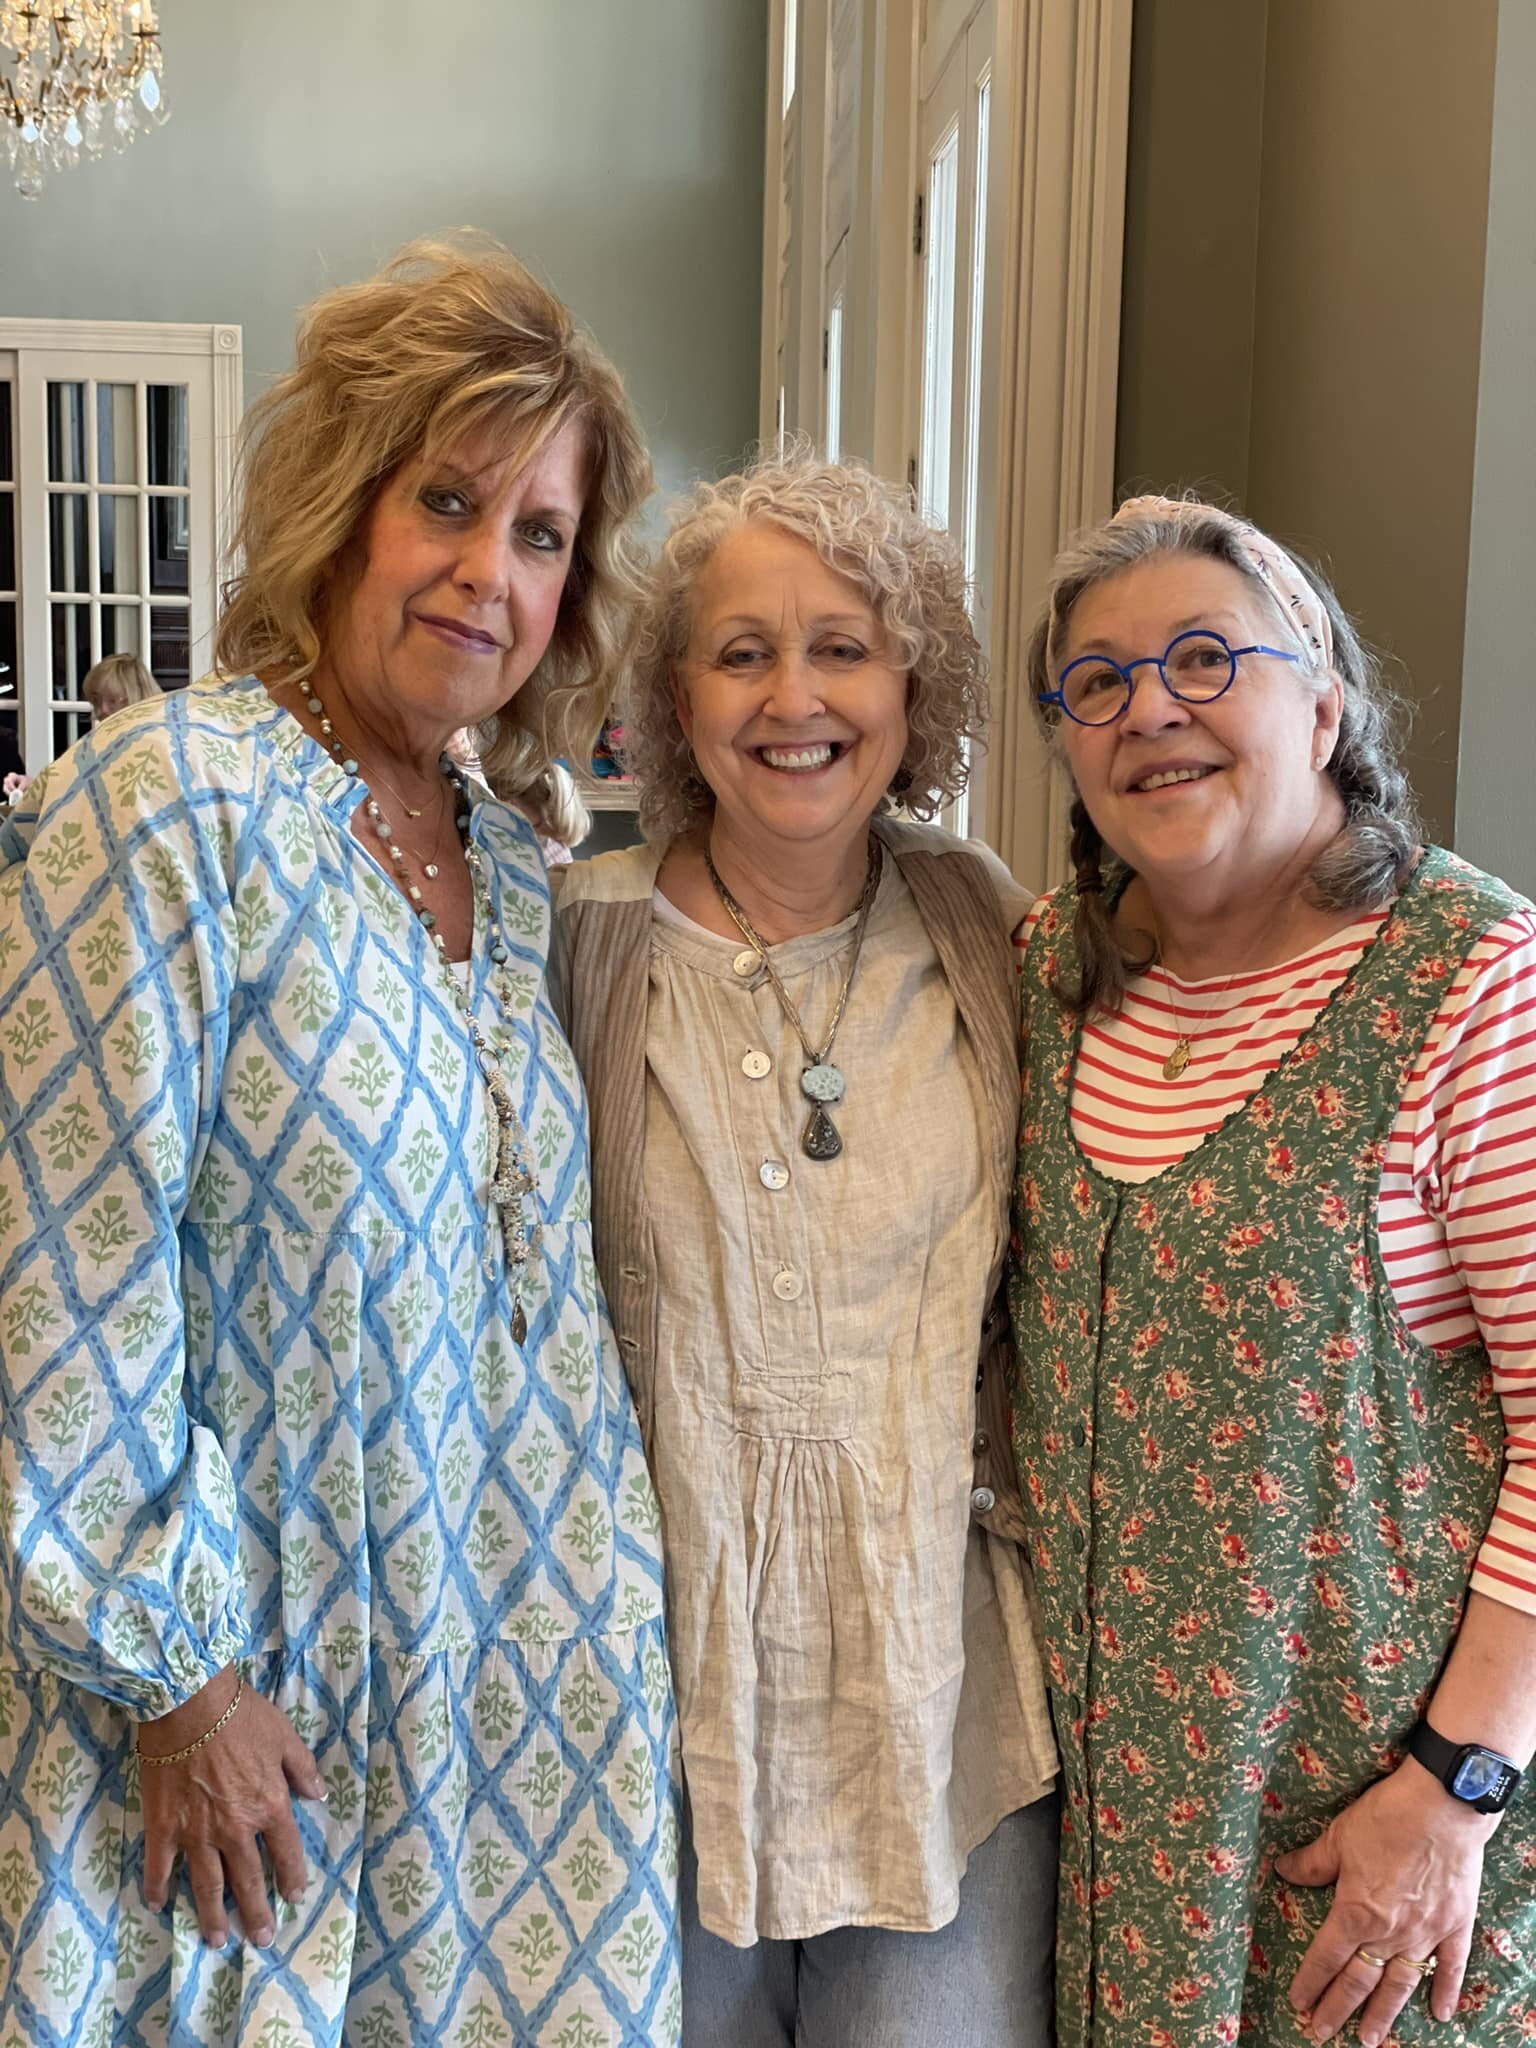 The first week of Terri Brush &lsquo;s Nashville Art Camp, was really fun teaching alongside Terri, Nina Bagley &amp; Brenda Bliss Delaney. 
The ladies in my Scalloped Filigree Earrings class had lots of fun, and were challenged by the project.  Sadl